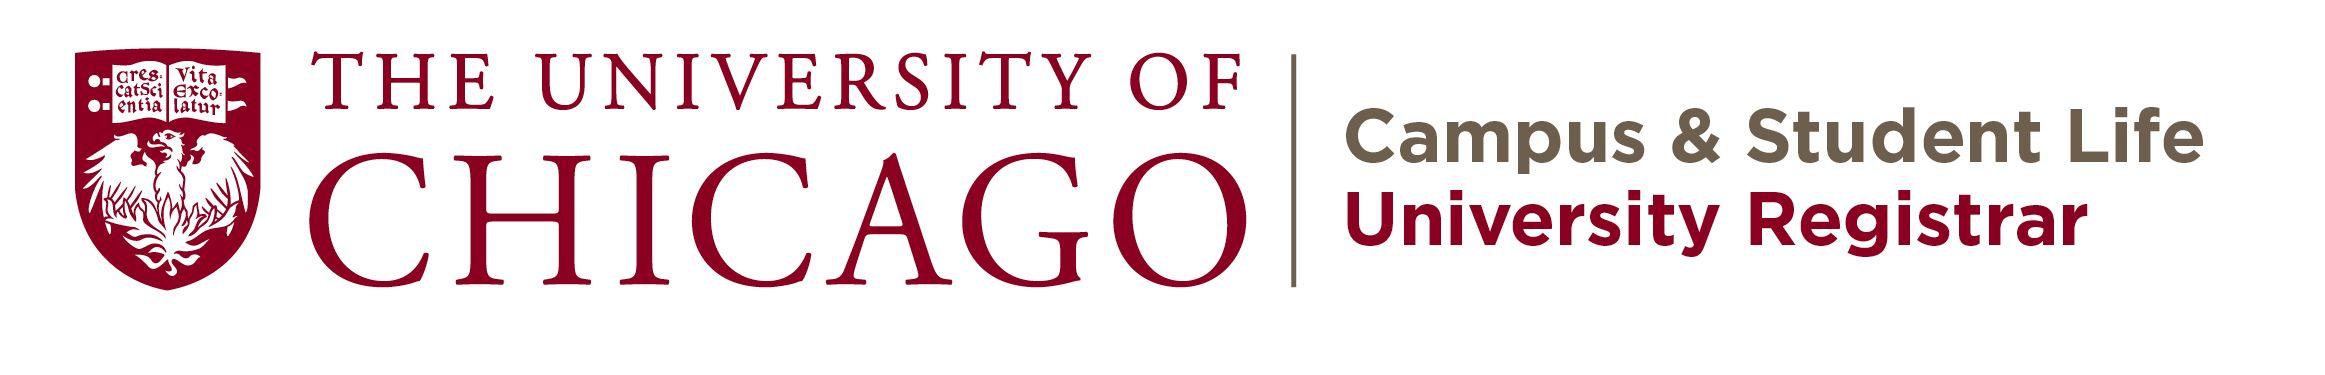 University of Chicago Logo - Campus and Student Life Identity Guidelines. Campus & Student Life